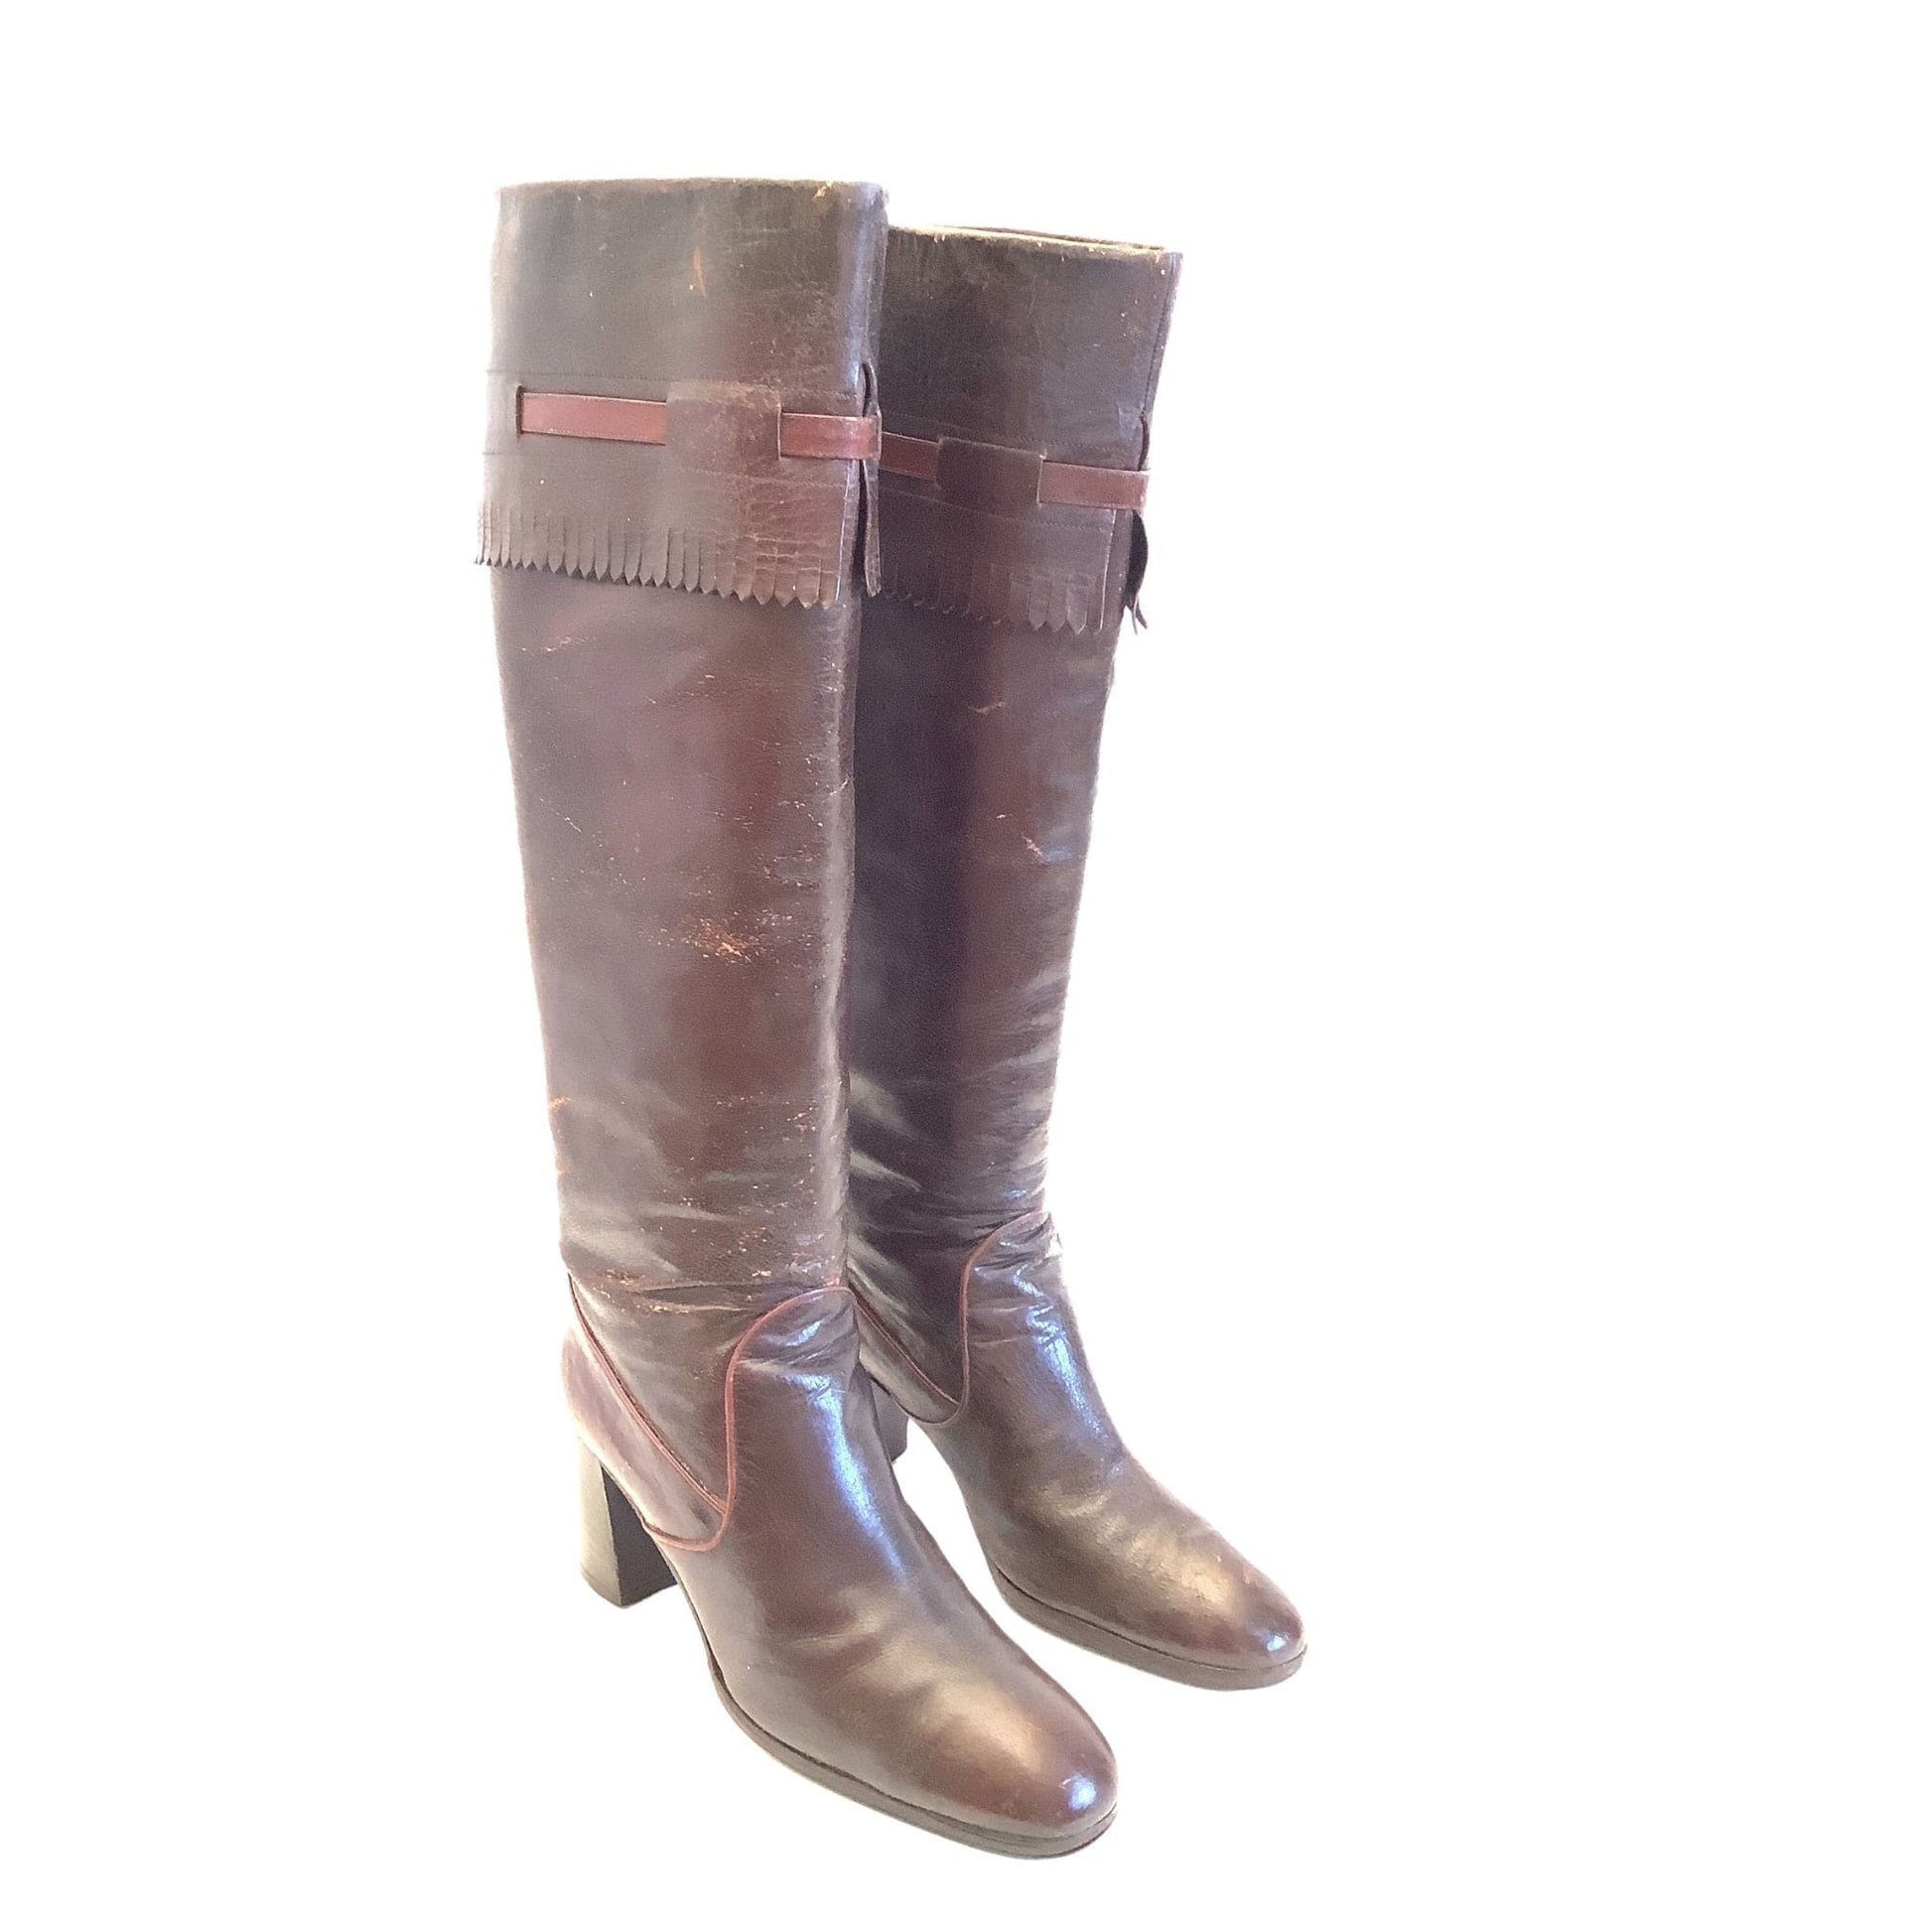 Collectible Gucci Boots 9 / Brown / Vintage 1970s